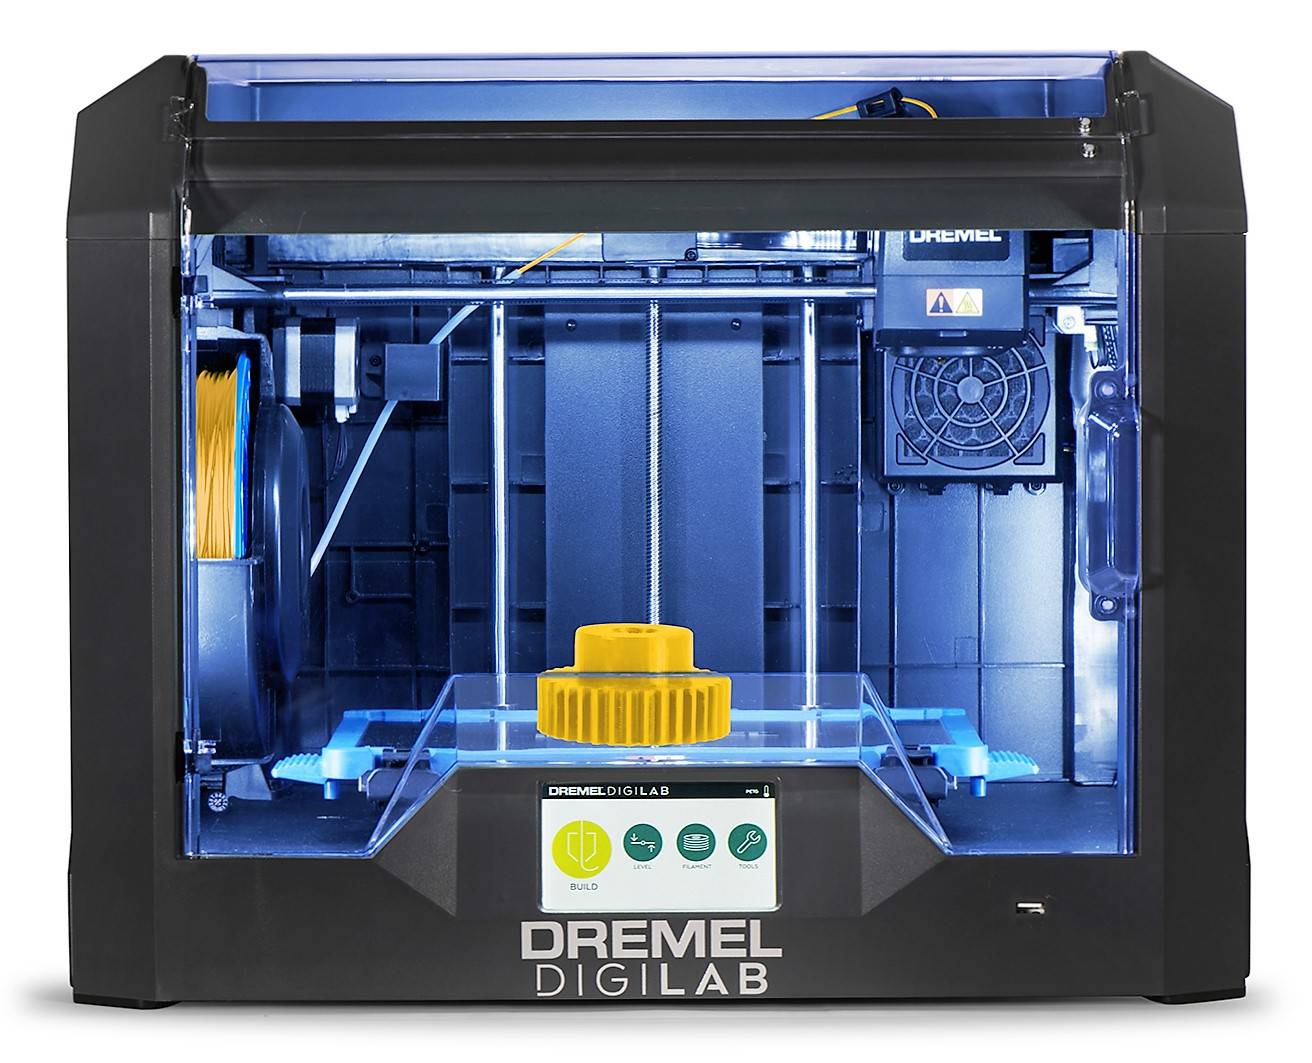 Front image of 3D45-01 3D printer with printed gear on bed, powered on and lit up.